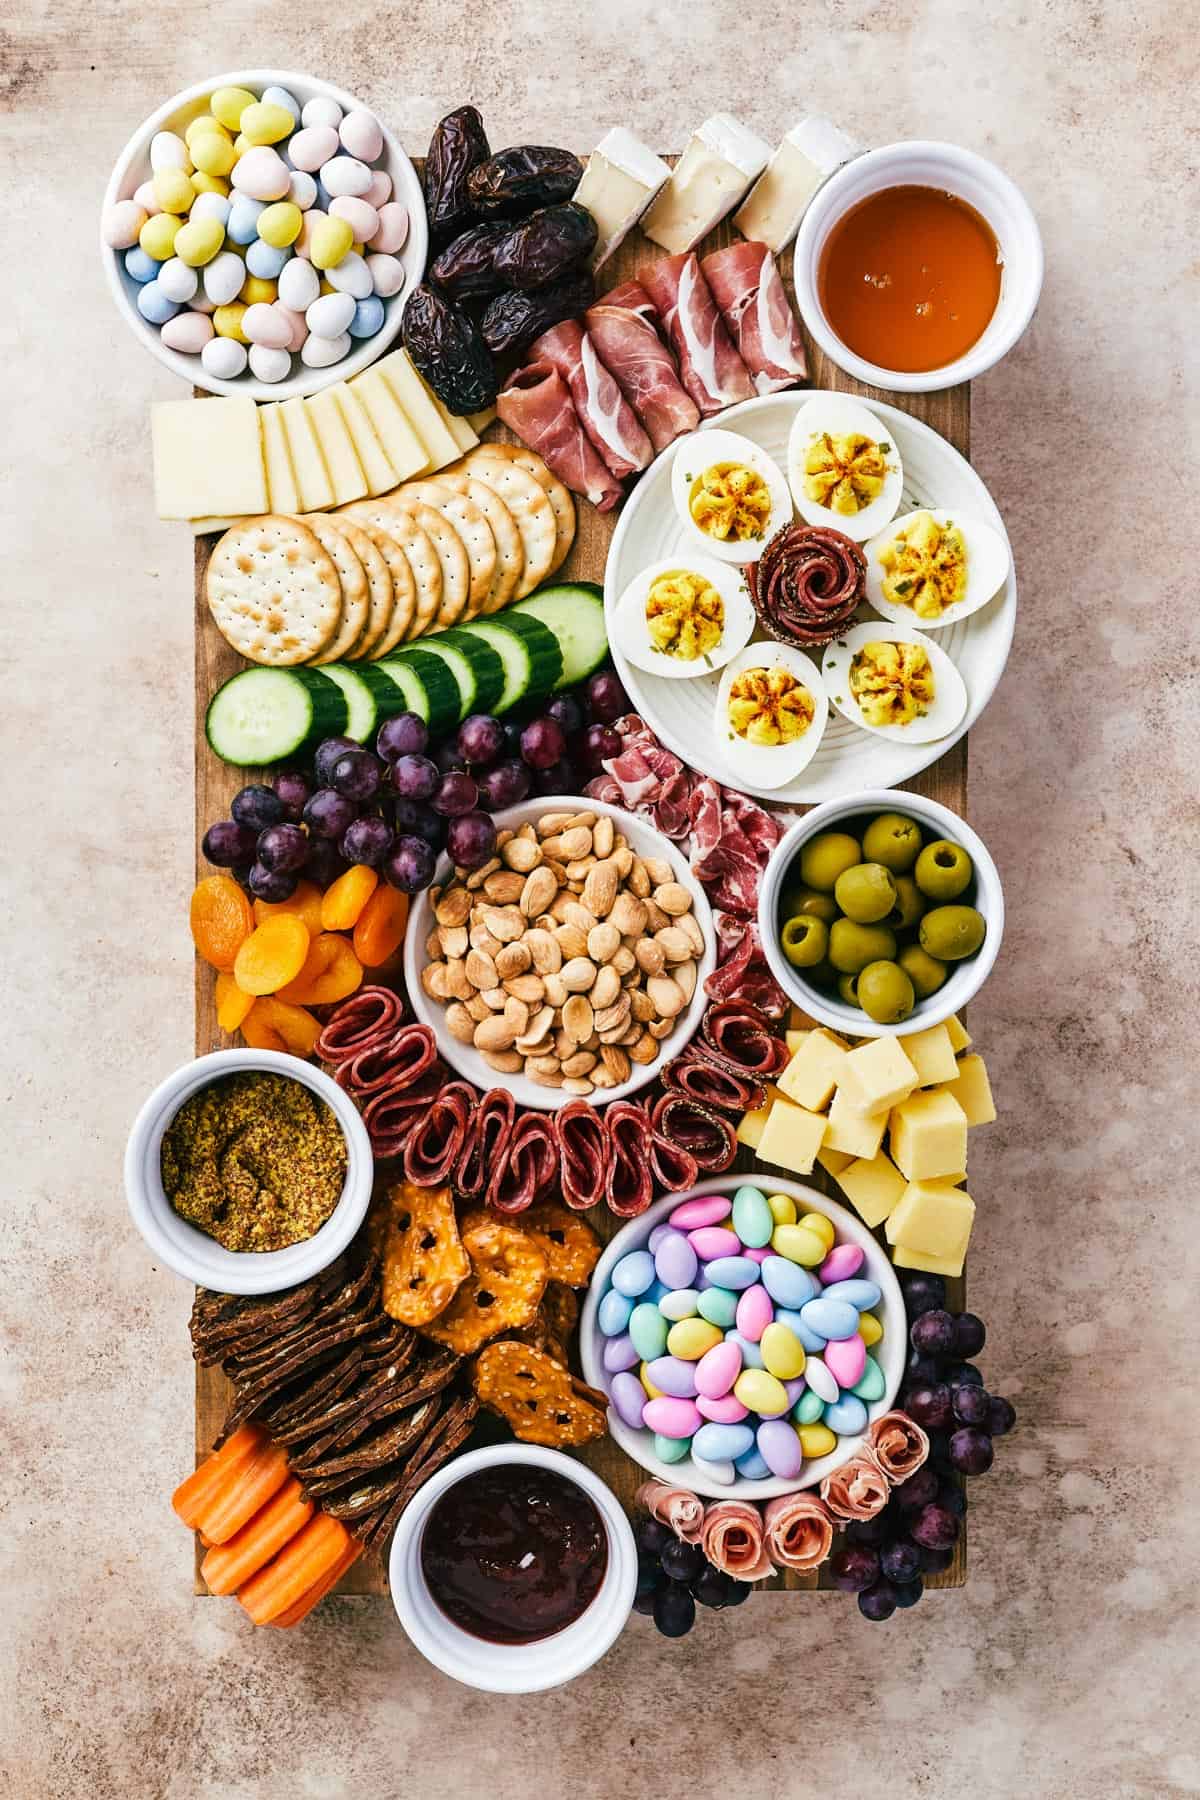 A wooden cutting board artistically arranged with meats, cheeses, crackers, olives, fruit, veggies, and more.